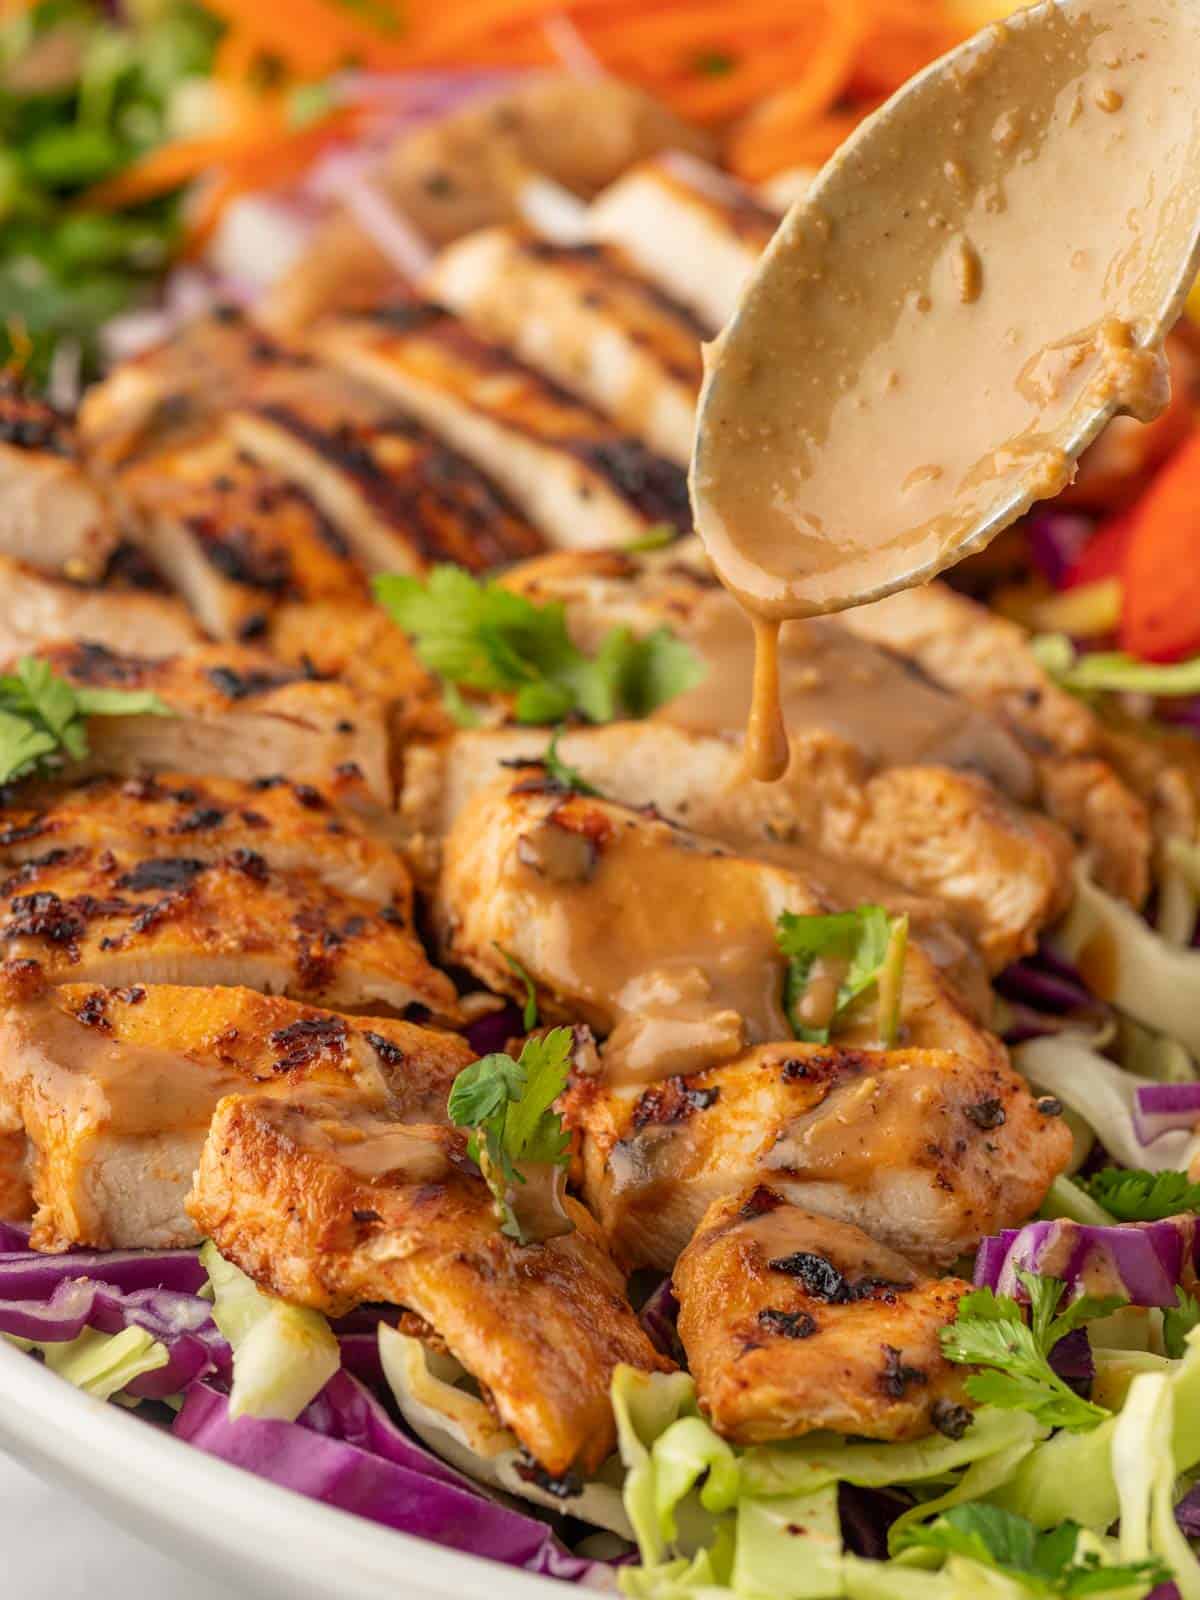 A spoon drizzles peanut butter over grilled chicken.